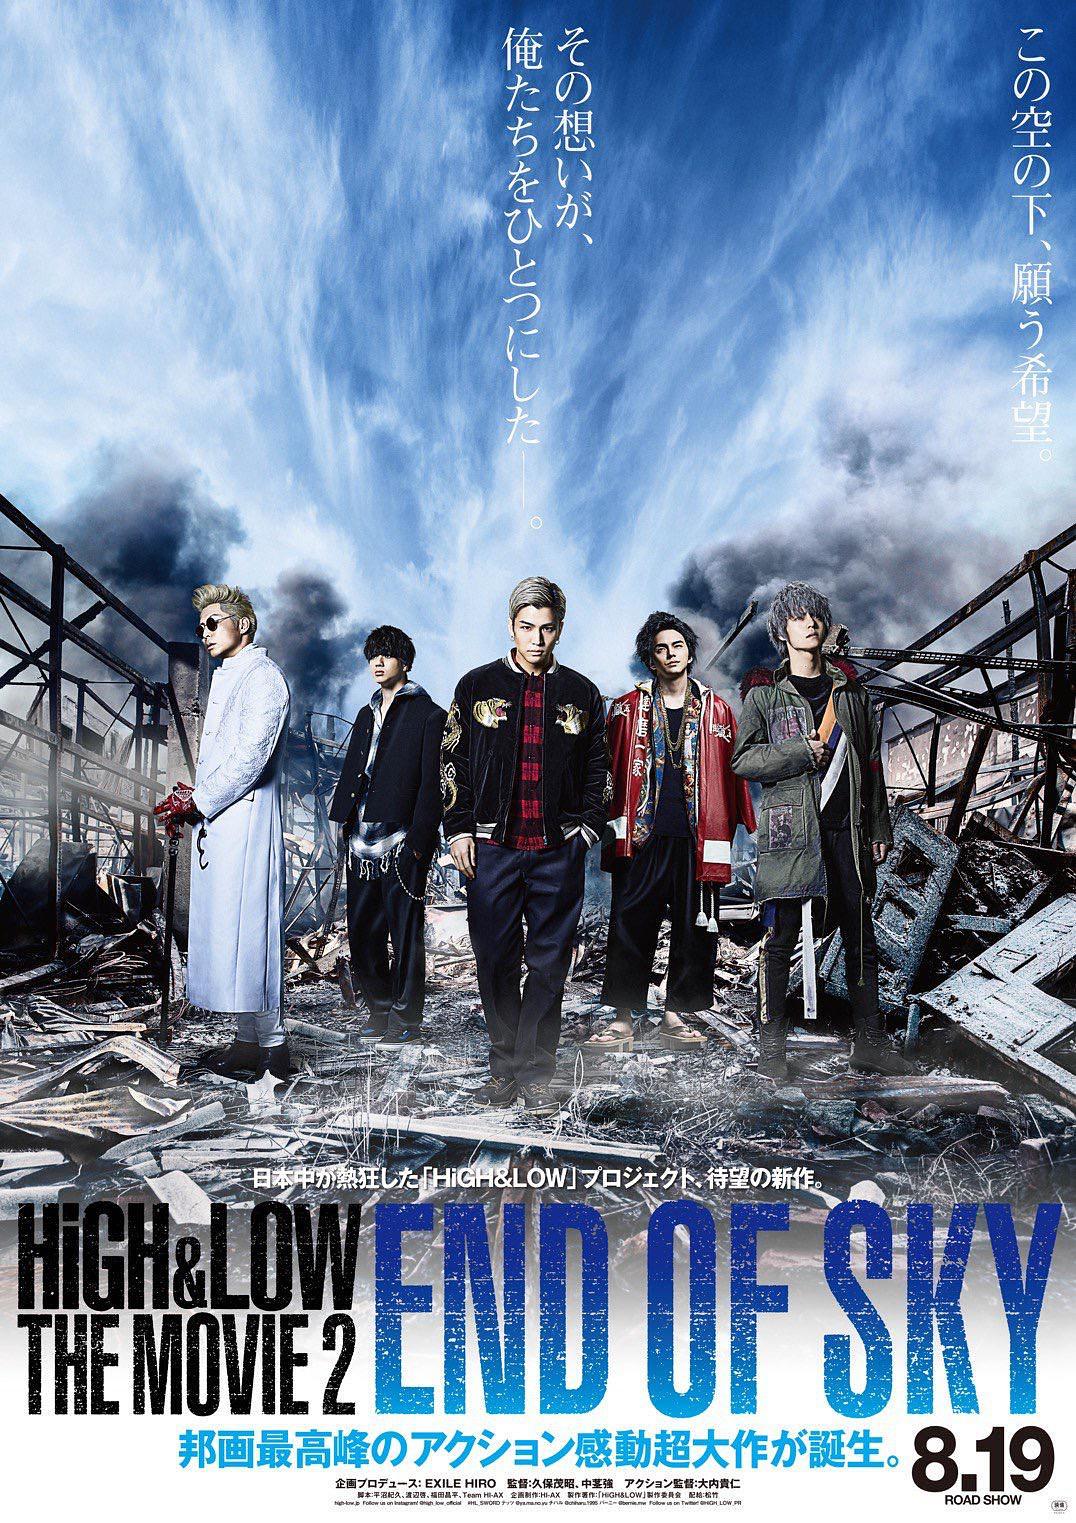 ѪӰ2:վͷ High.And.Low.The.Movie.2.End.Of.Sky.2017.JAPANESE.1080p.BluRay.x26-1.png